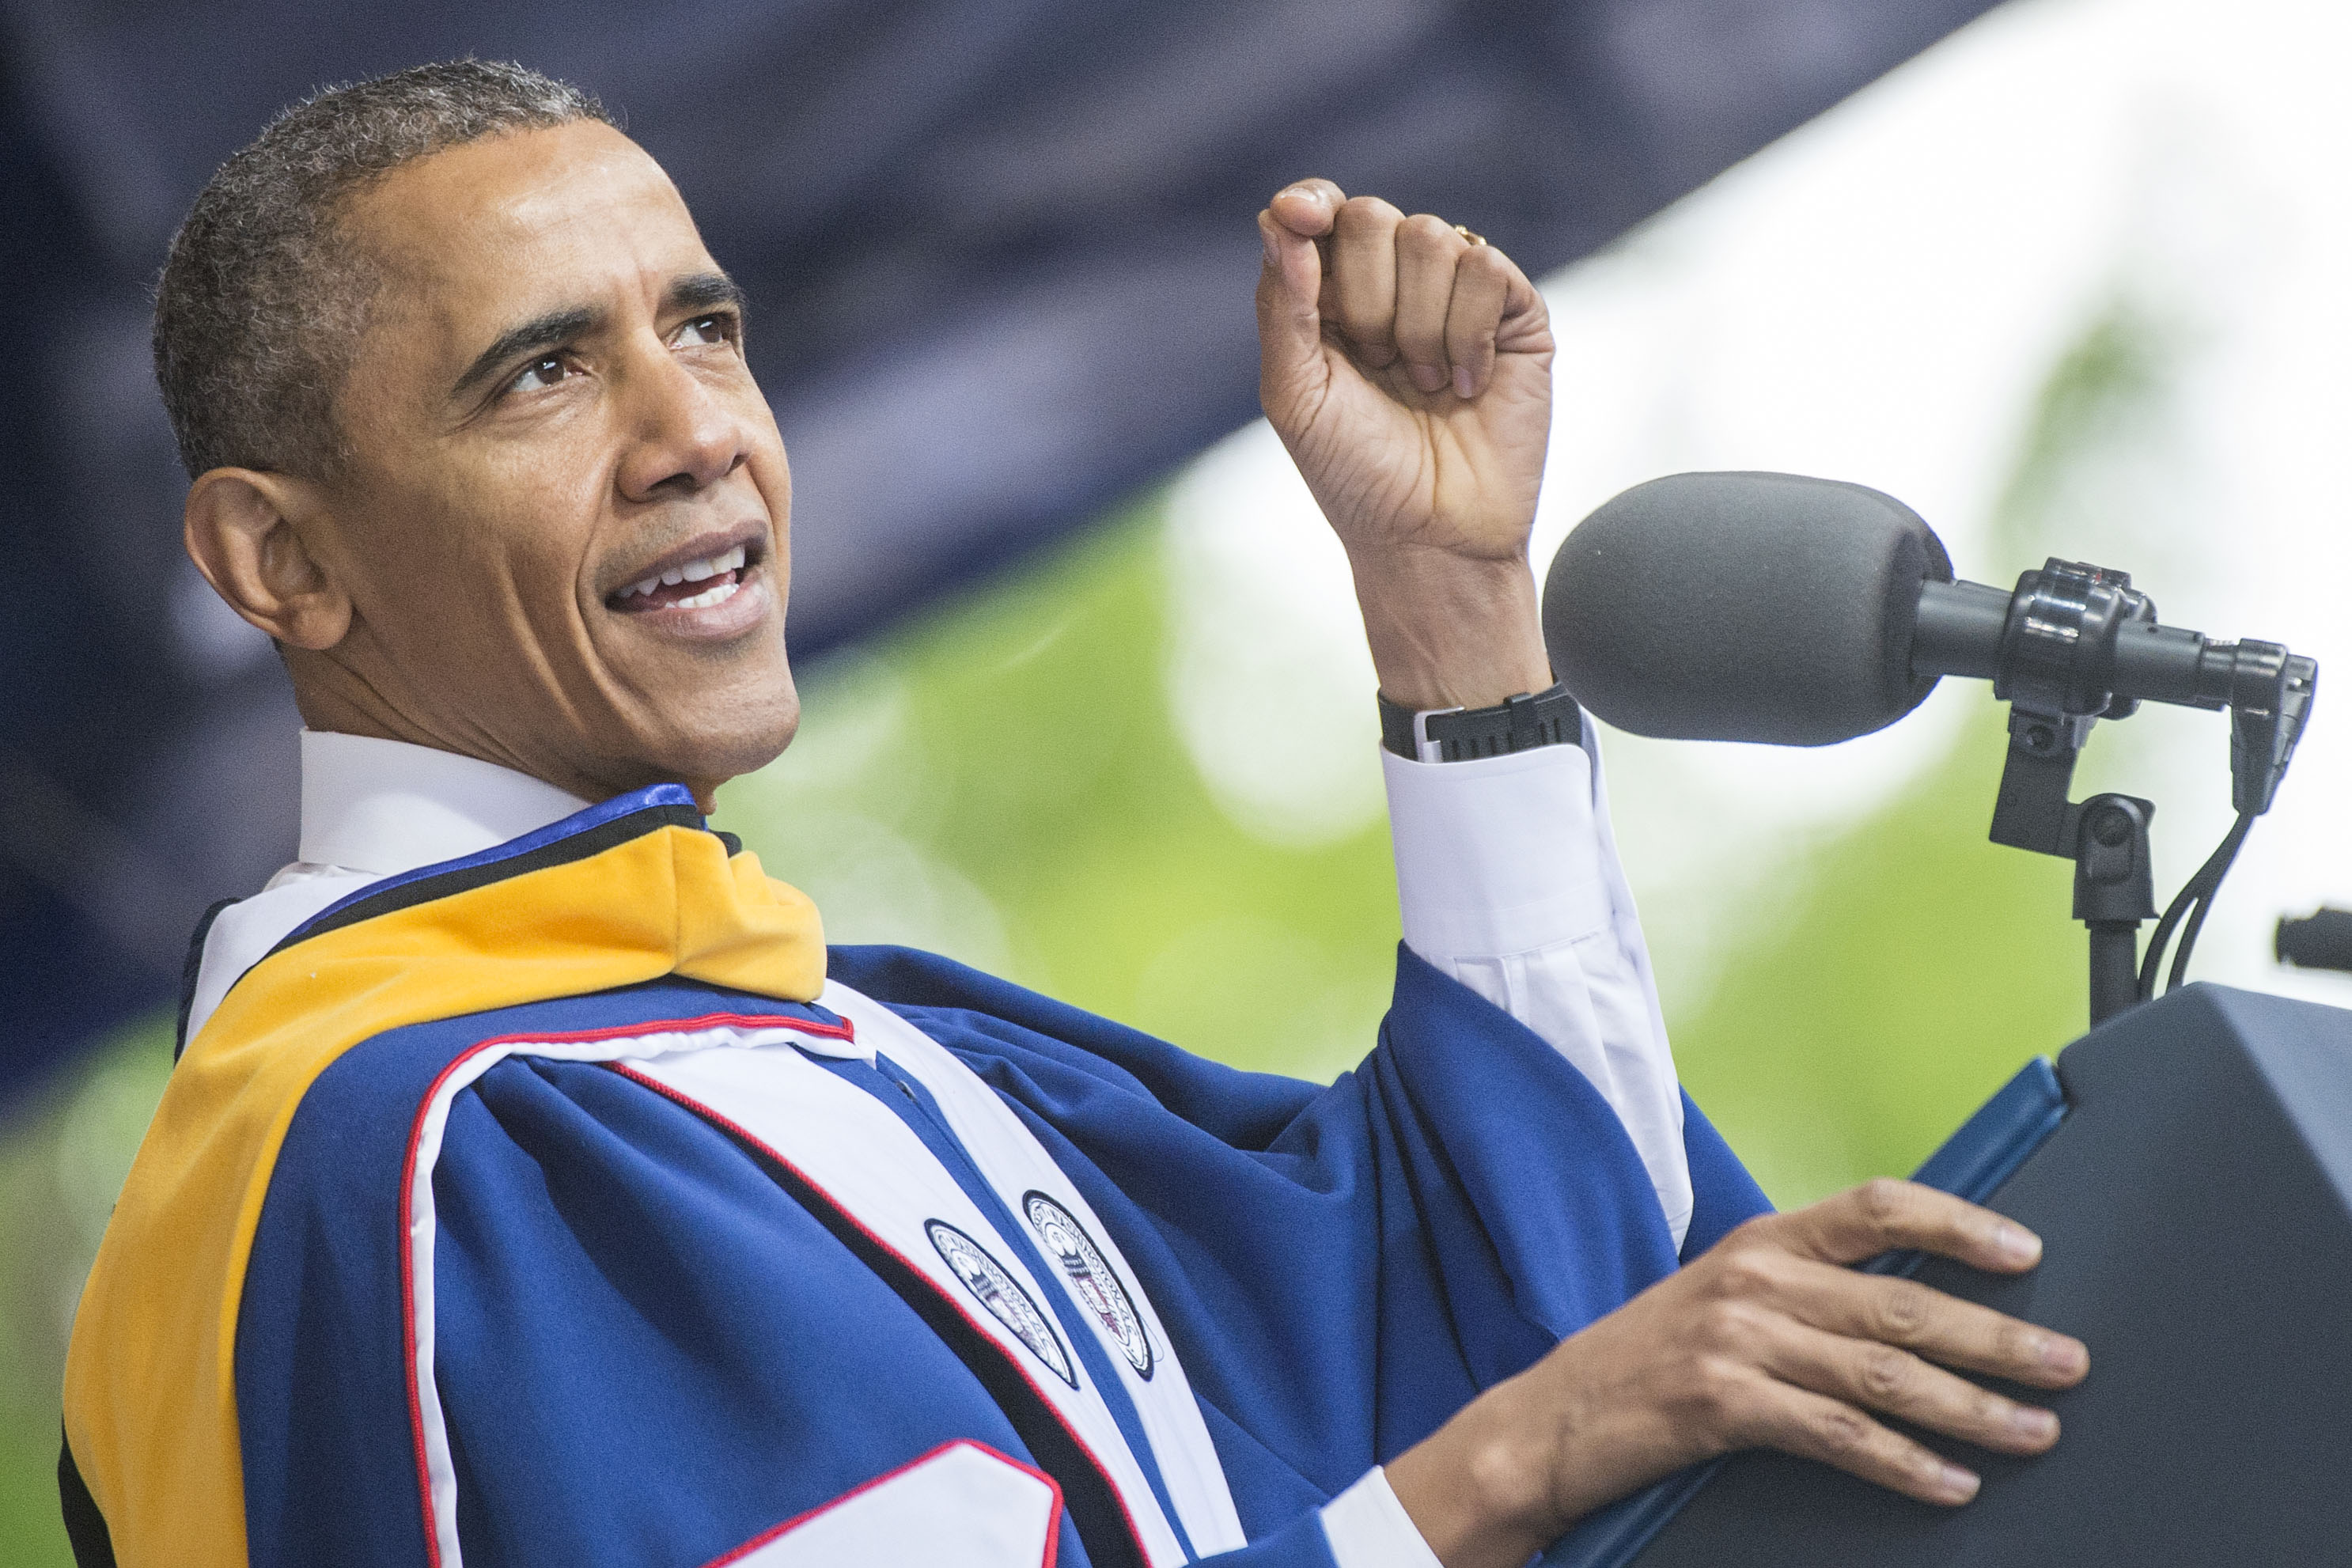 Barack Obama speaks during the 148th commencement ceremony at Howard University in Washington, D.C. on May 7, 2016. (Al Drago—CQ-Roll Call/Getty Images)